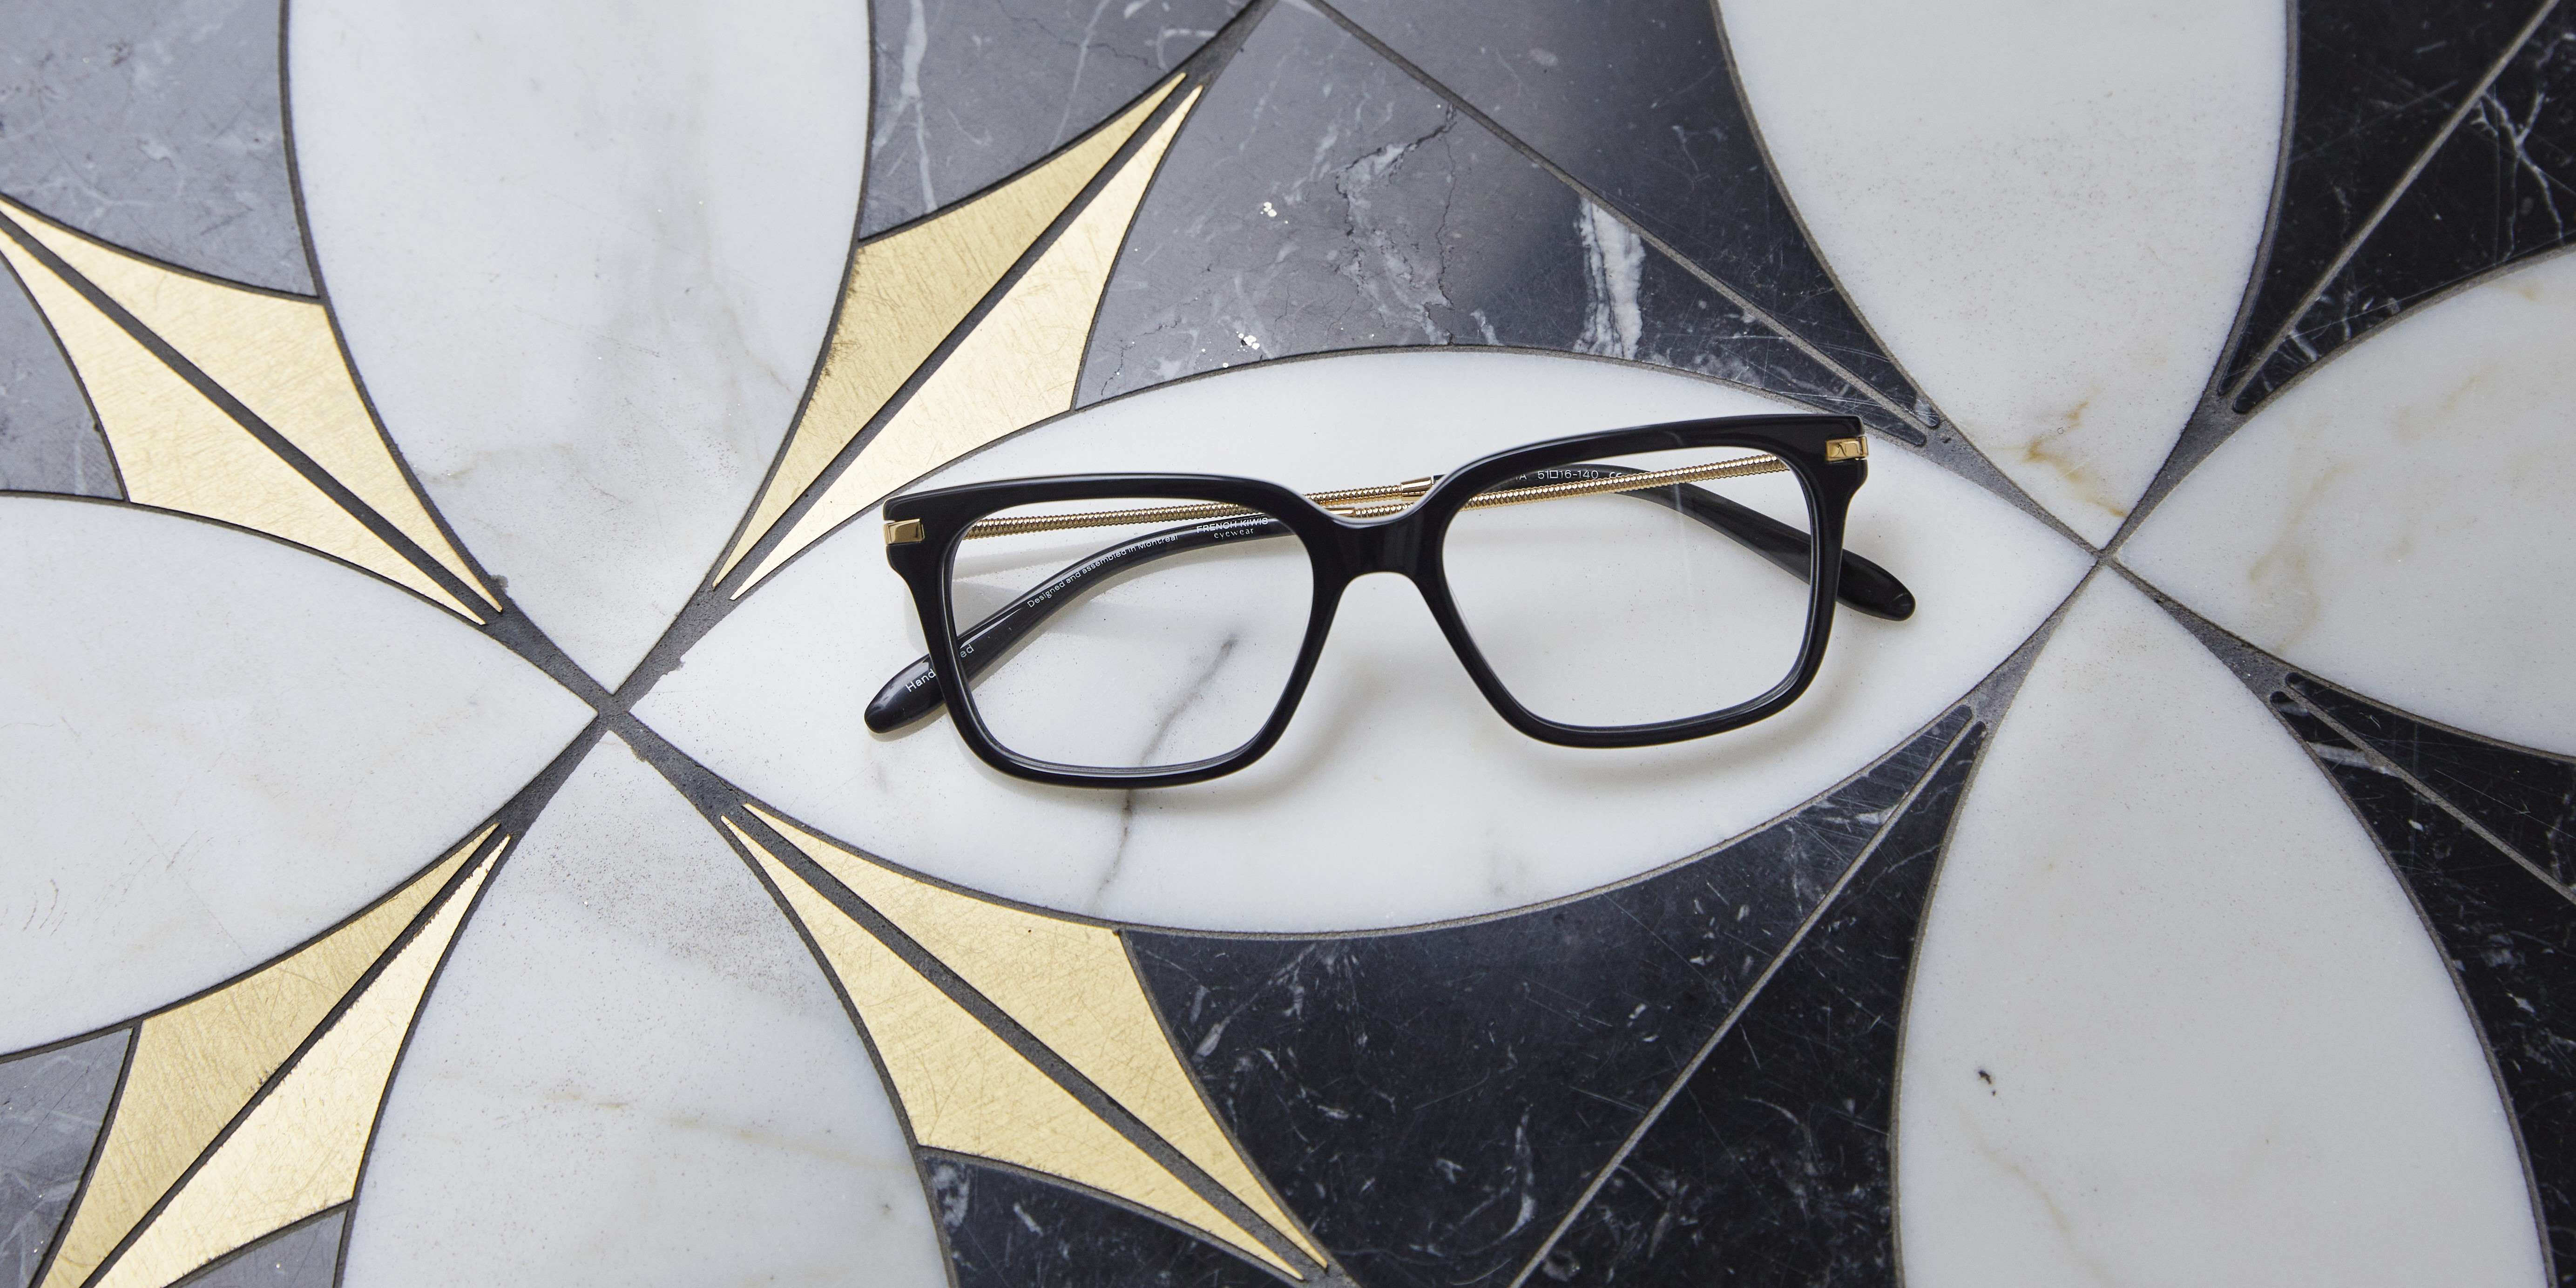 Photo Details of Sasha Black & Gold Reading Glasses in a room